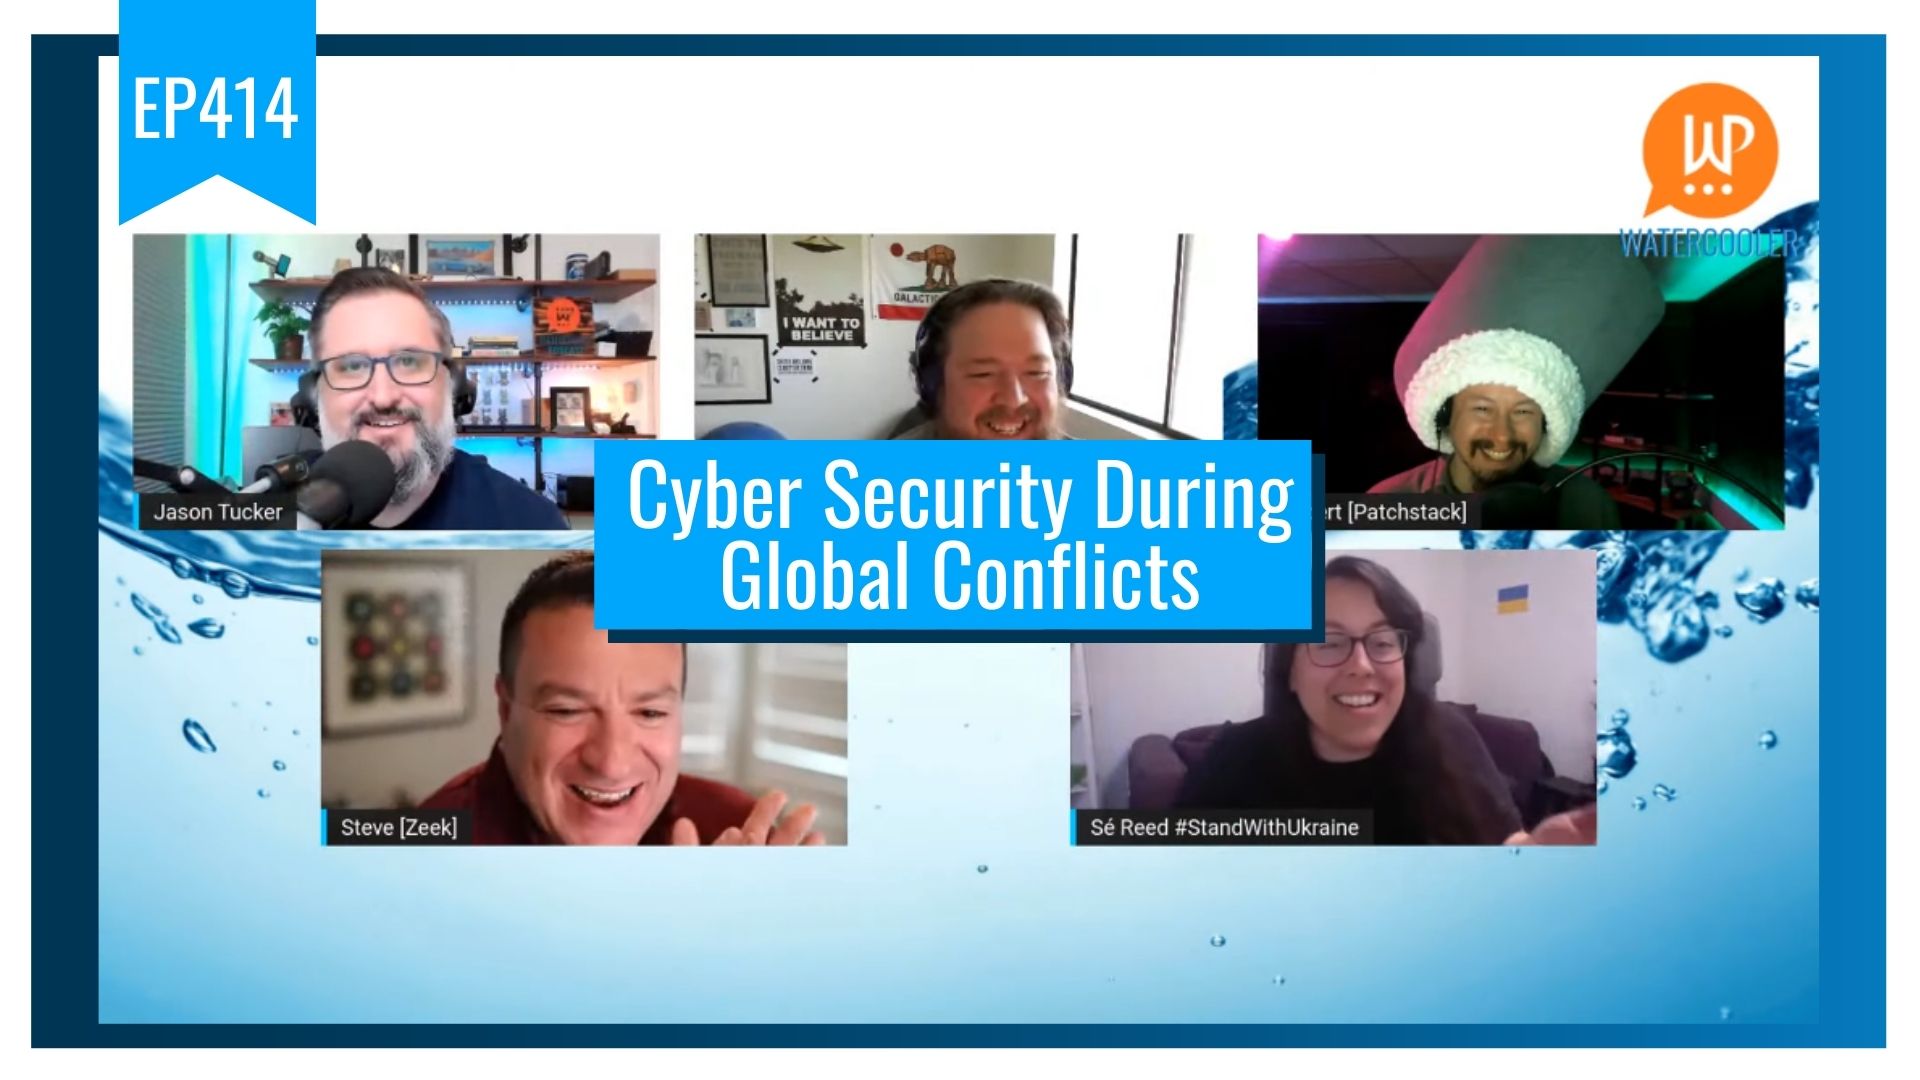 EP414 – Cyber Security During Global Conflicts